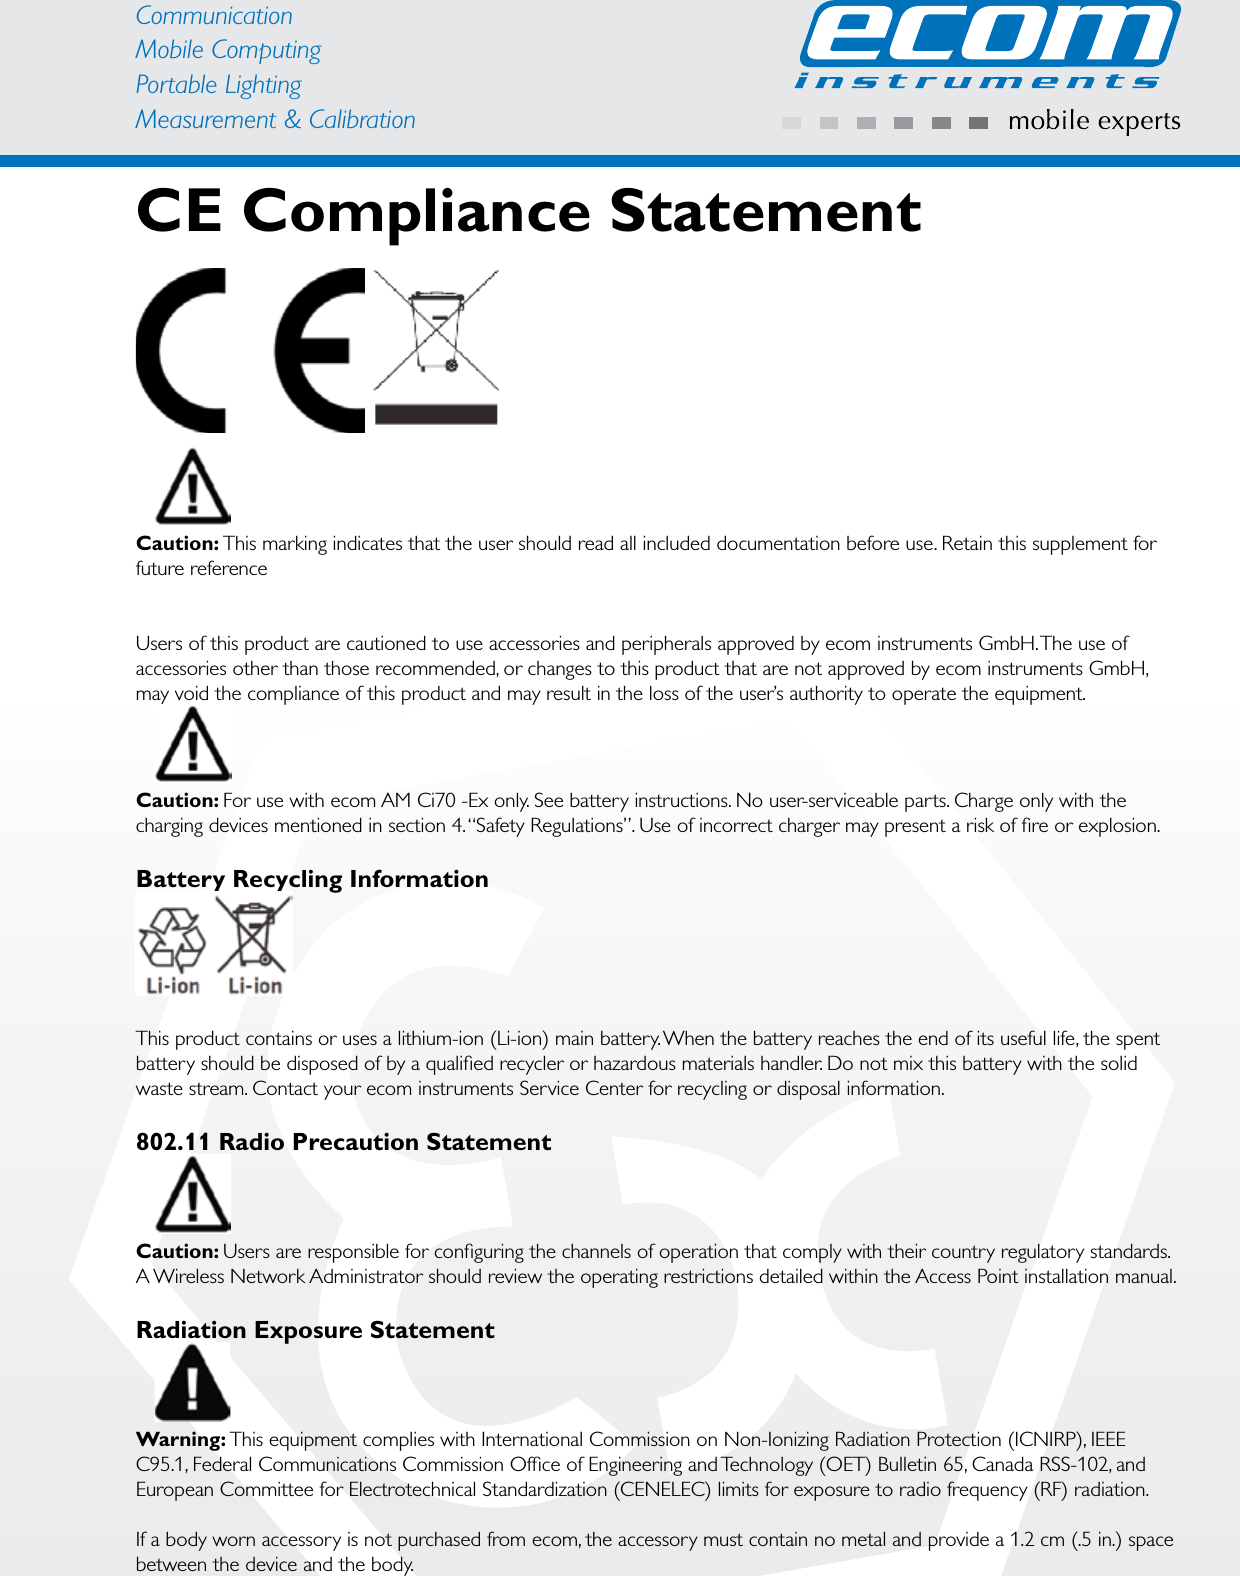 CommunicationMobile ComputingPortable Lighting Measurement &amp; CalibrationCE Compliance StatementCaution: This marking indicates that the user should read all included documentation before use. Retain this supplement for future referenceUsers of this product are cautioned to use accessories and peripherals approved by ecom instruments GmbH. The use of accessories other than those recommended, or changes to this product that are not approved by ecom instruments GmbH, may void the compliance of this product and may result in the loss of the user’s authority to operate the equipment.Caution: For use with ecom AM Ci70 -Ex only. See battery instructions. No user-serviceable parts. Charge only with the charging devices mentioned in section 4. “Safety Regulations”. Use of incorrect charger may present a risk of ﬁ re or explosion.Battery Recycling InformationThis product contains or uses a lithium-ion (Li-ion) main battery. When the battery reaches the end of its useful life, the spent battery should be disposed of by a qualiﬁ ed recycler or hazardous materials handler. Do not mix this battery with the solid waste stream. Contact your ecom instruments Service Center for recycling or disposal information.802.11 Radio Precaution StatementCaution: Users are responsible for conﬁ guring the channels of operation that comply with their country regulatory standards. A Wireless Network Administrator should review the operating restrictions detailed within the Access Point installation manual.Radiation Exposure StatementWarning: This equipment complies with International Commission on Non-Ionizing Radiation Protection (ICNIRP), IEEE C95.1, Federal Communications Commission Ofﬁ ce of Engineering and Technology (OET) Bulletin 65, Canada RSS-102, and European Committee for Electrotechnical Standardization (CENELEC) limits for exposure to radio frequency (RF) radiation.If a body worn accessory is not purchased from ecom, the accessory must contain no metal and provide a 1.2 cm (.5 in.) space between the device and the body.